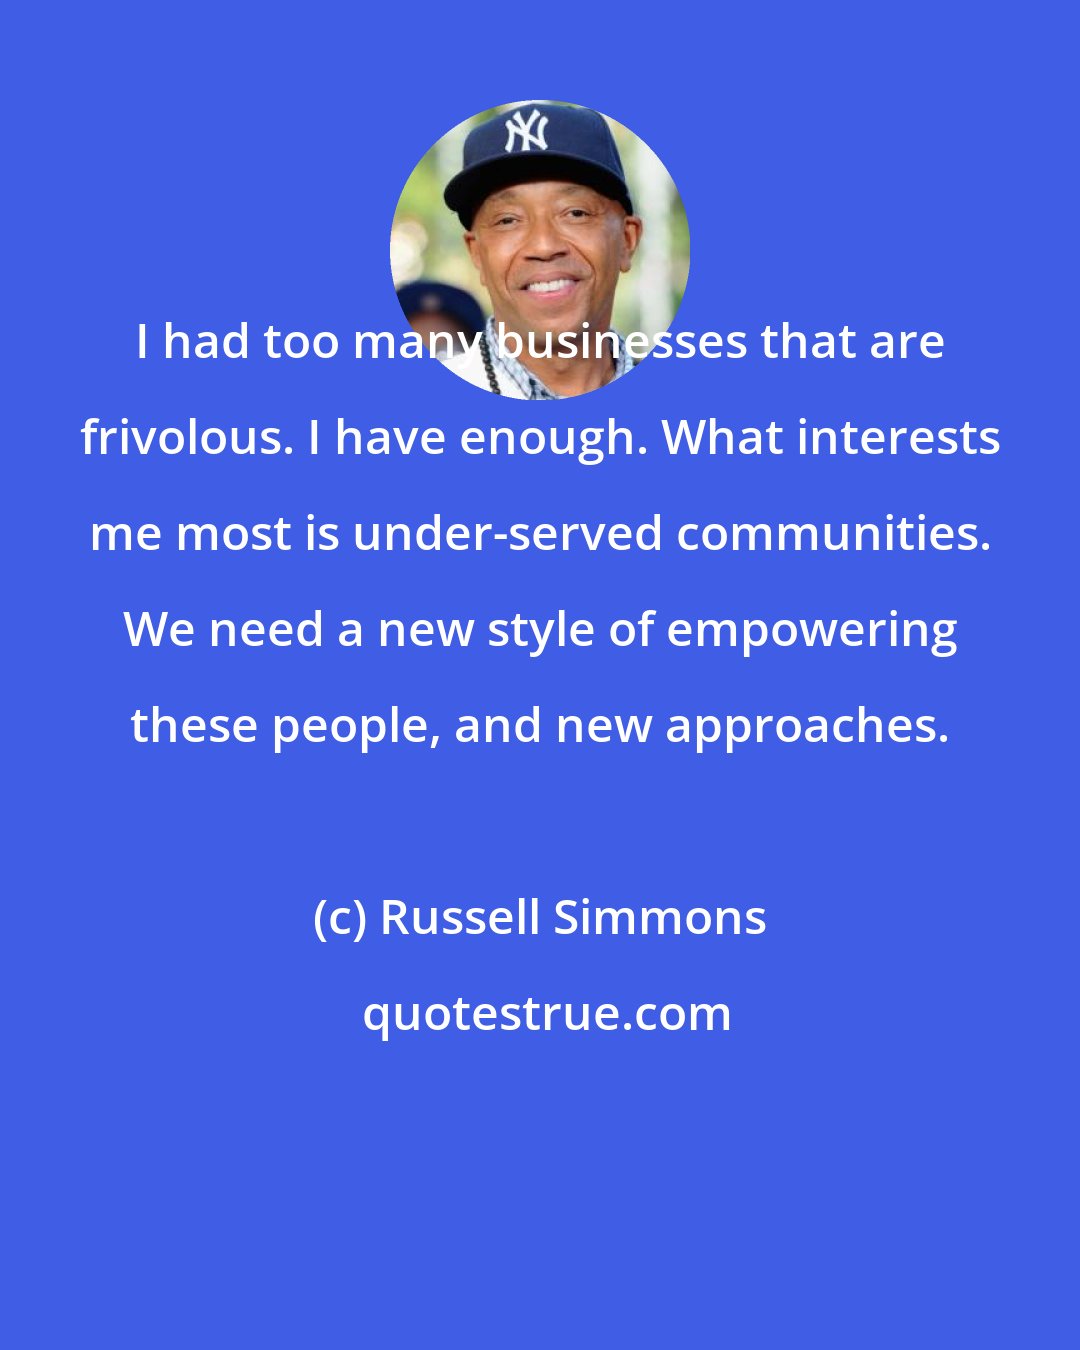 Russell Simmons: I had too many businesses that are frivolous. I have enough. What interests me most is under-served communities. We need a new style of empowering these people, and new approaches.